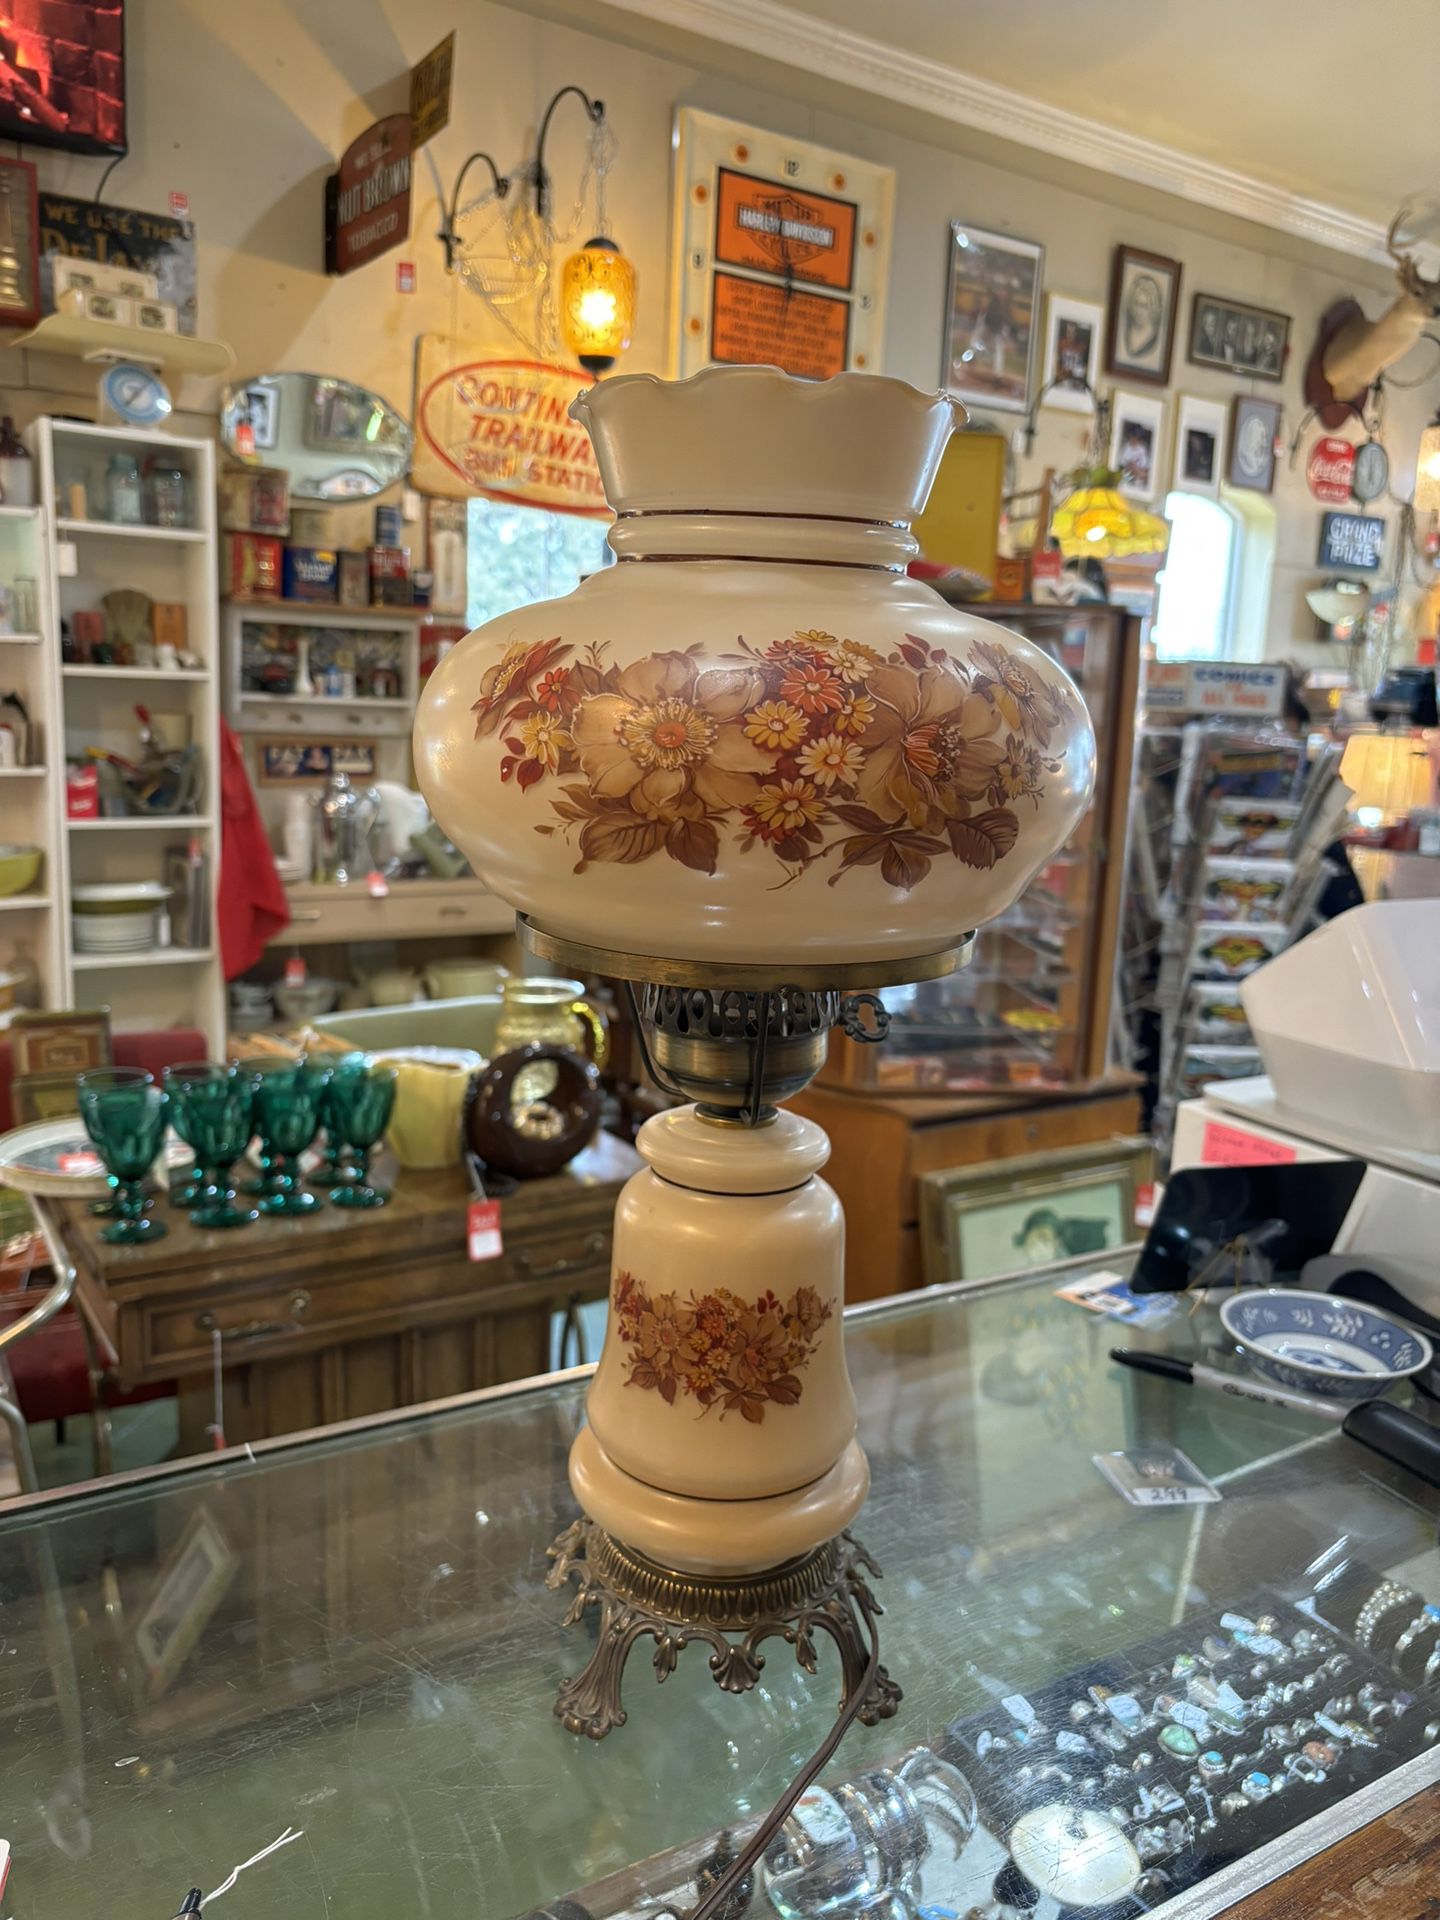 11x20 inches 3 way beige floral hurricane farmhouse lamp. 85.00.  Johanna at Antiques and More. Located at 316b Main Street Buda. Antiques vintage ret